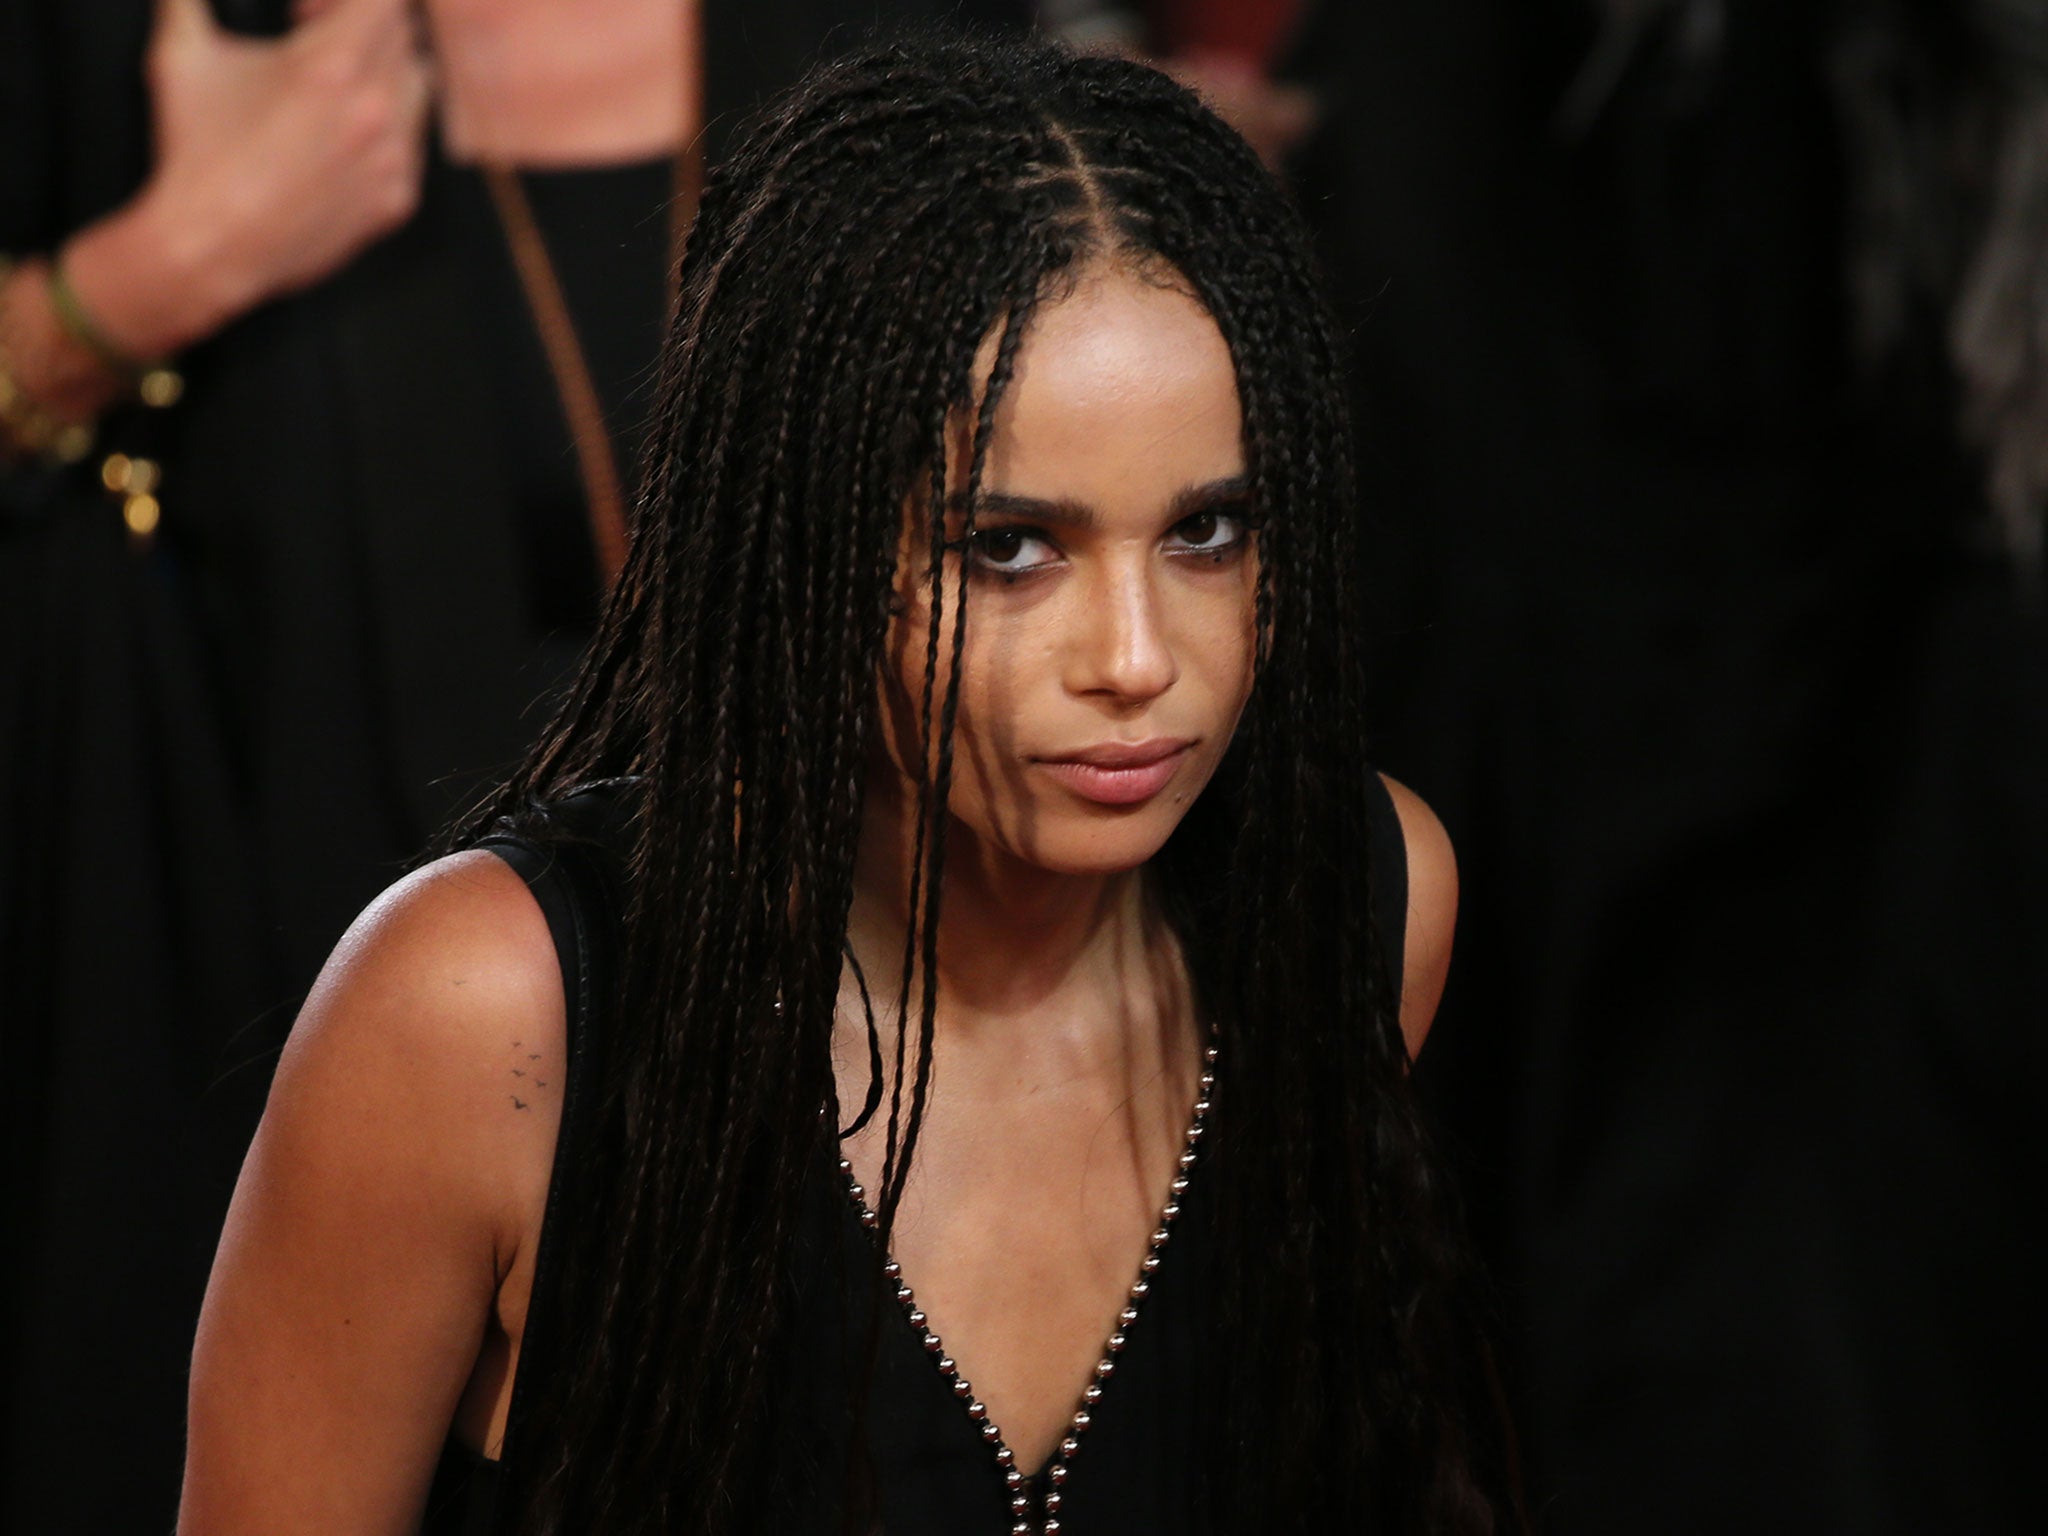 Zoe Kravitz was rejected from The Dark Knight Rises for being too 'urban'